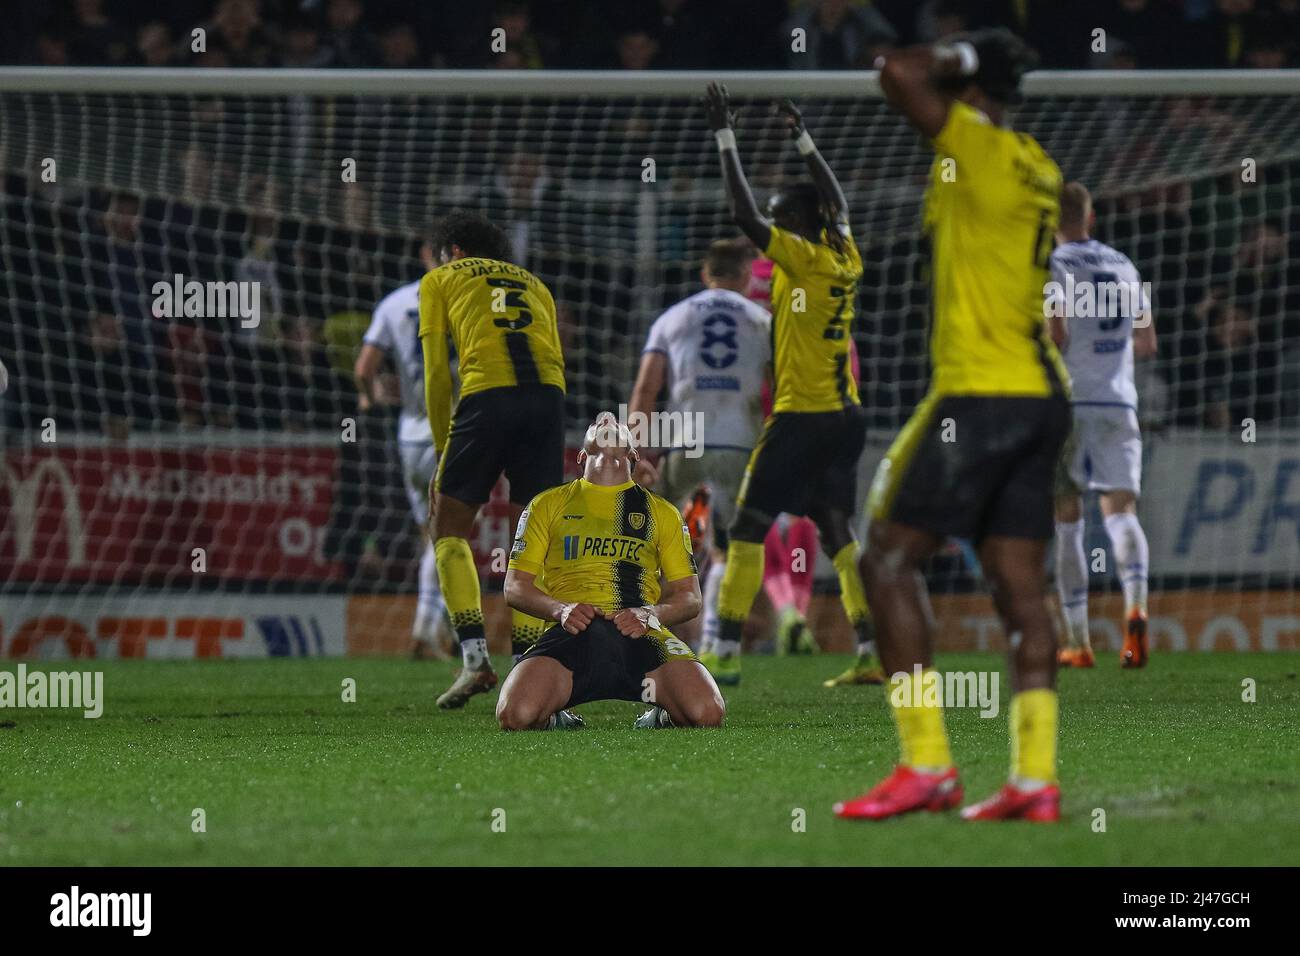 Burton Upon Trent, UK. 12th Apr, 2022. Joe Powell #8 of Burton Albion looks dejected after a goal line clearance denies his team of a late winner in Burton upon Trent, United Kingdom on 4/12/2022. (Photo by Gareth Evans/News Images/Sipa USA) Credit: Sipa USA/Alamy Live News Stock Photo